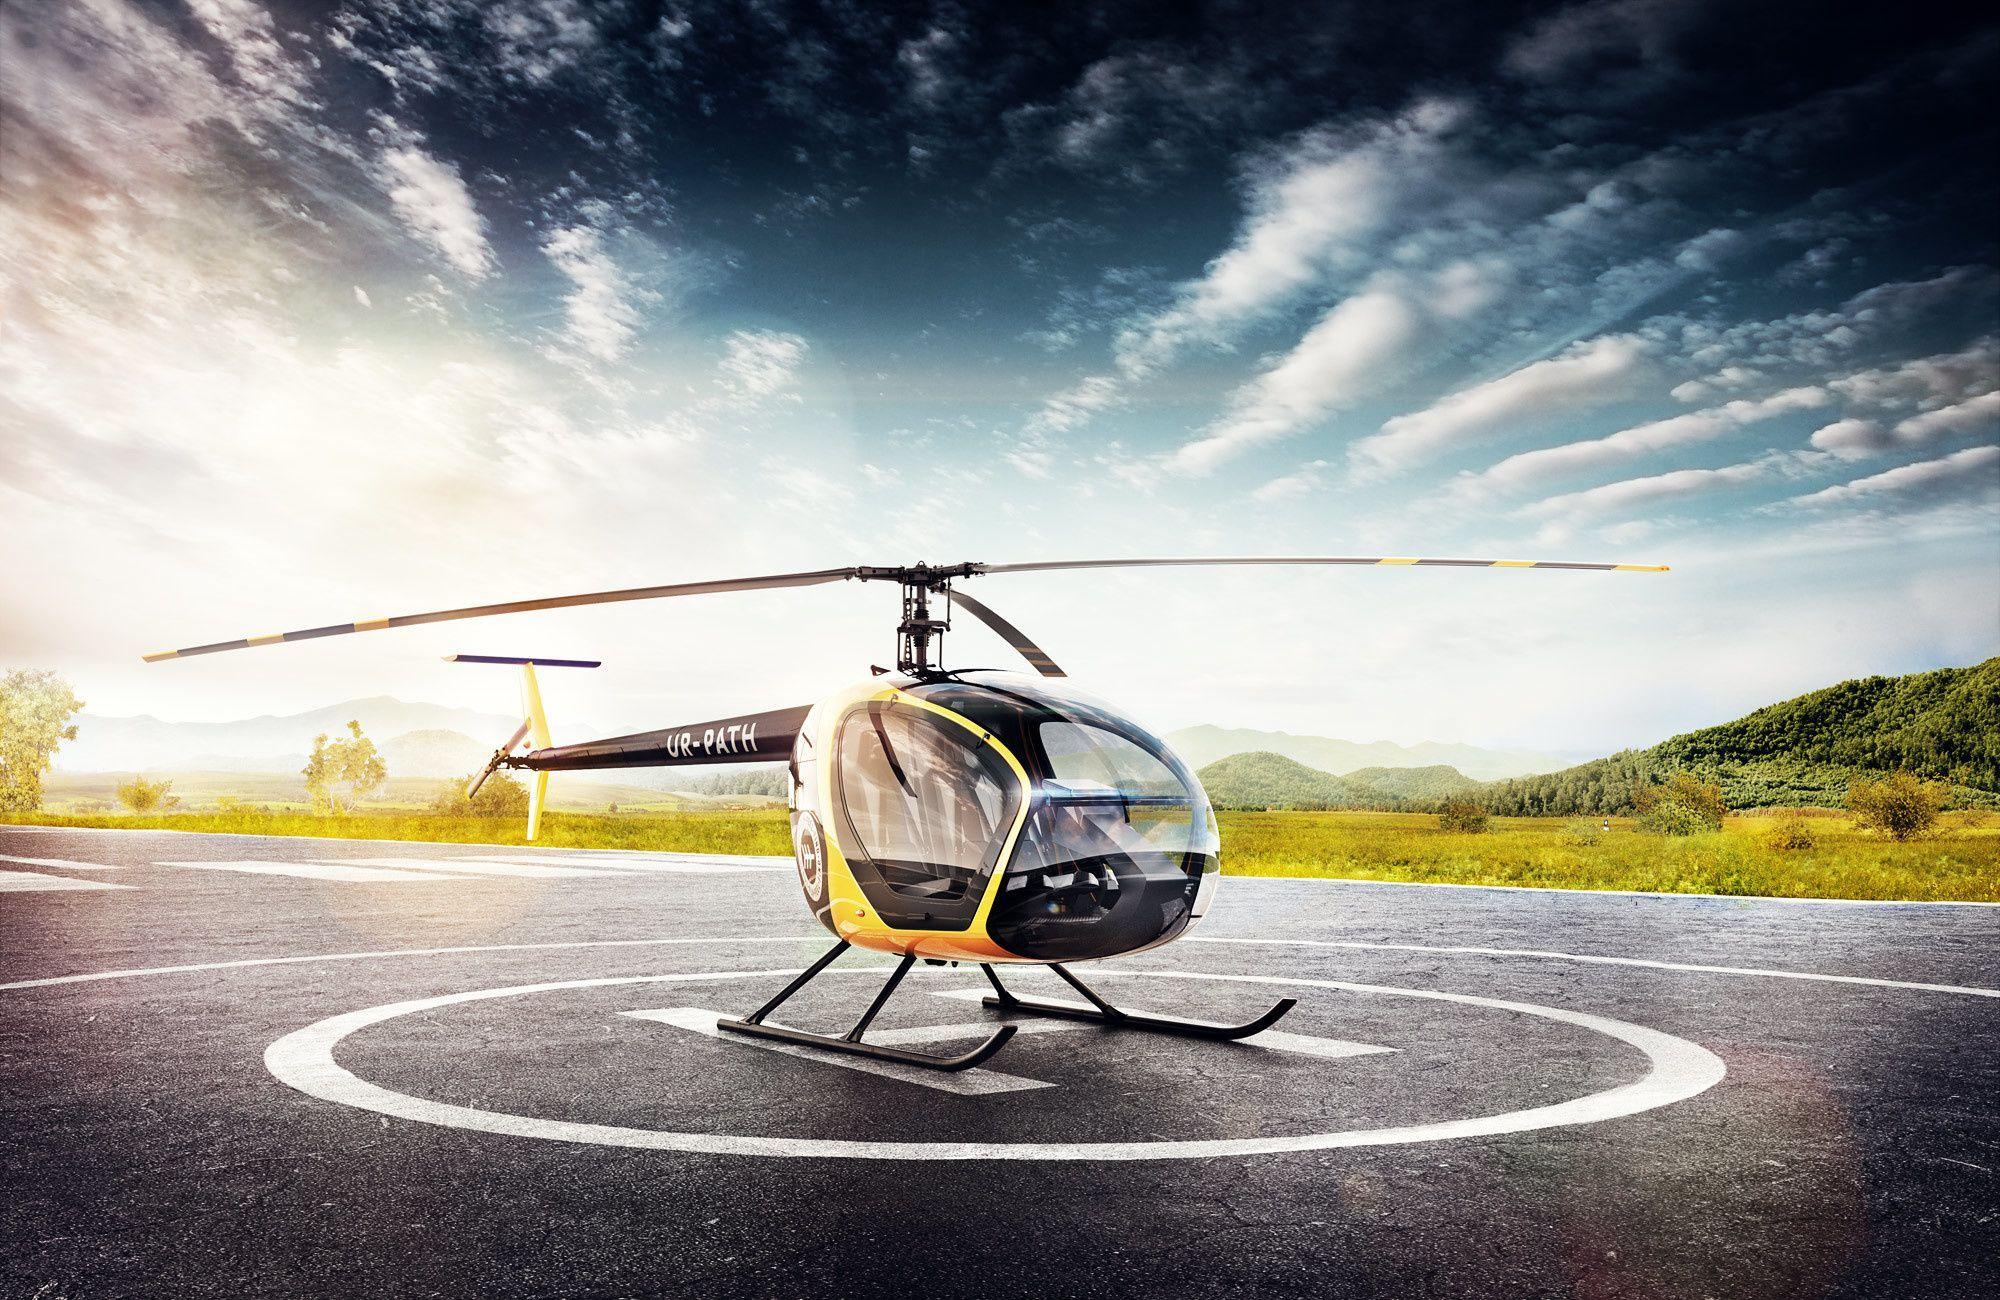 Helicopter Wallpaperesque. HD Wallpaper